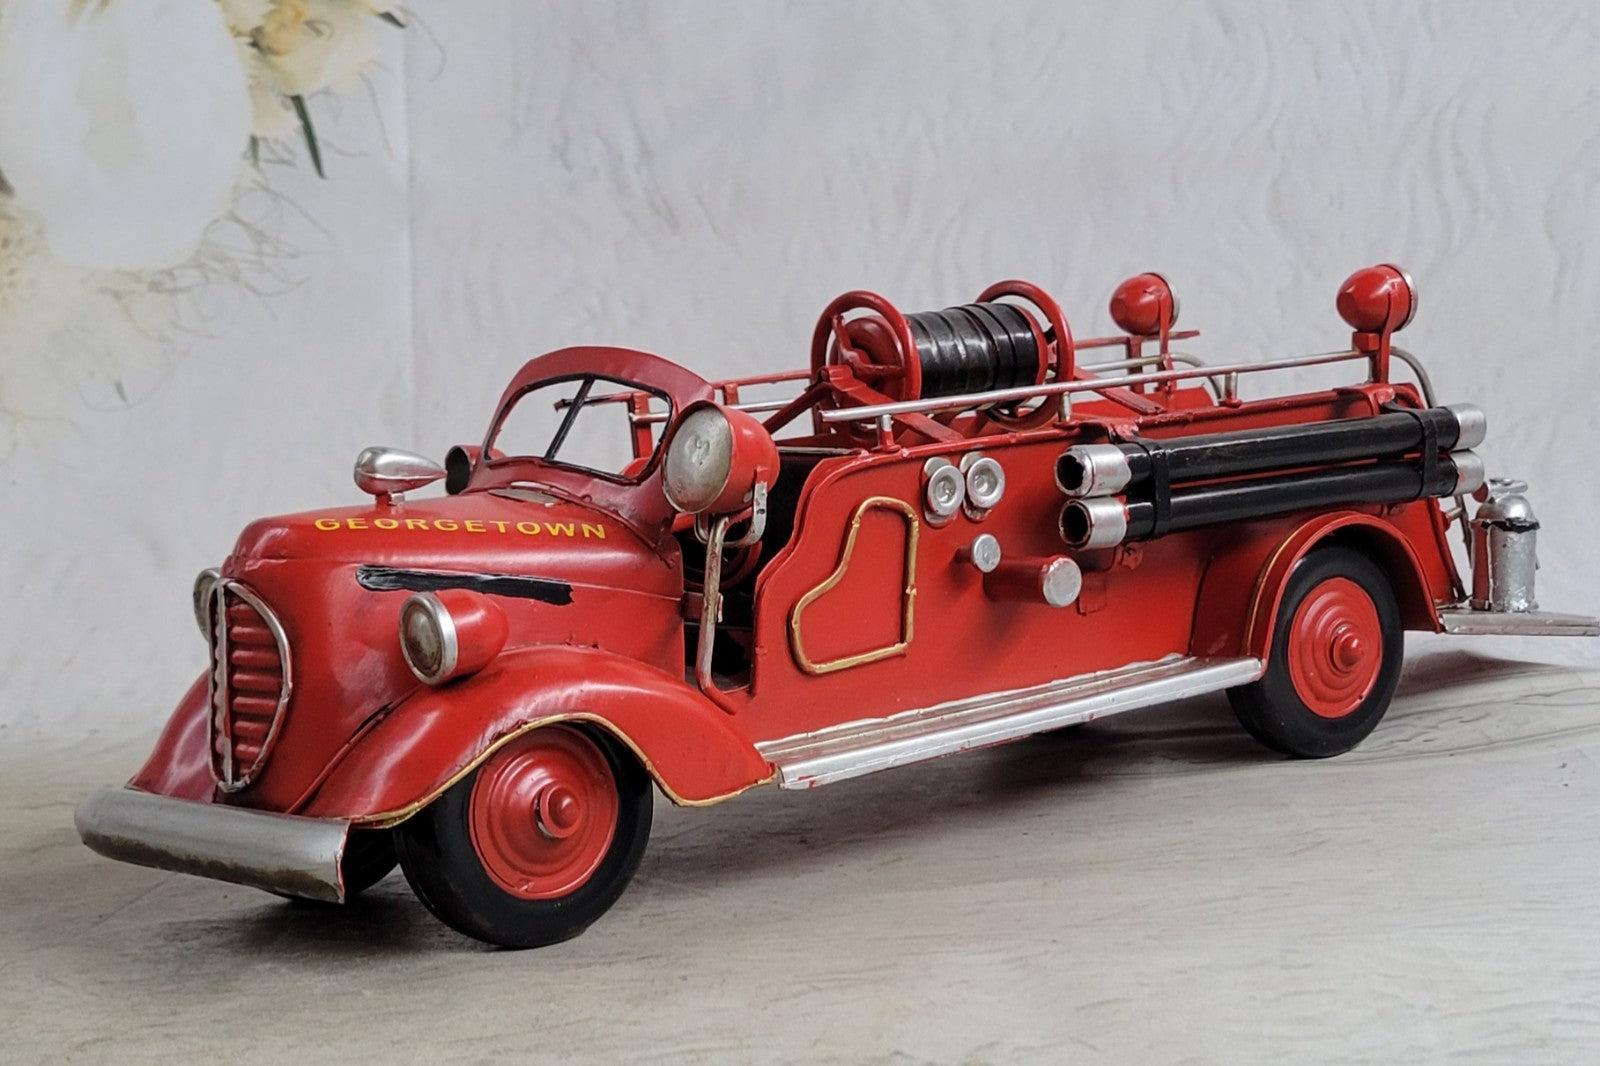 Ford created this sturdy little pumper for the Georgetown Engine Company No. 1